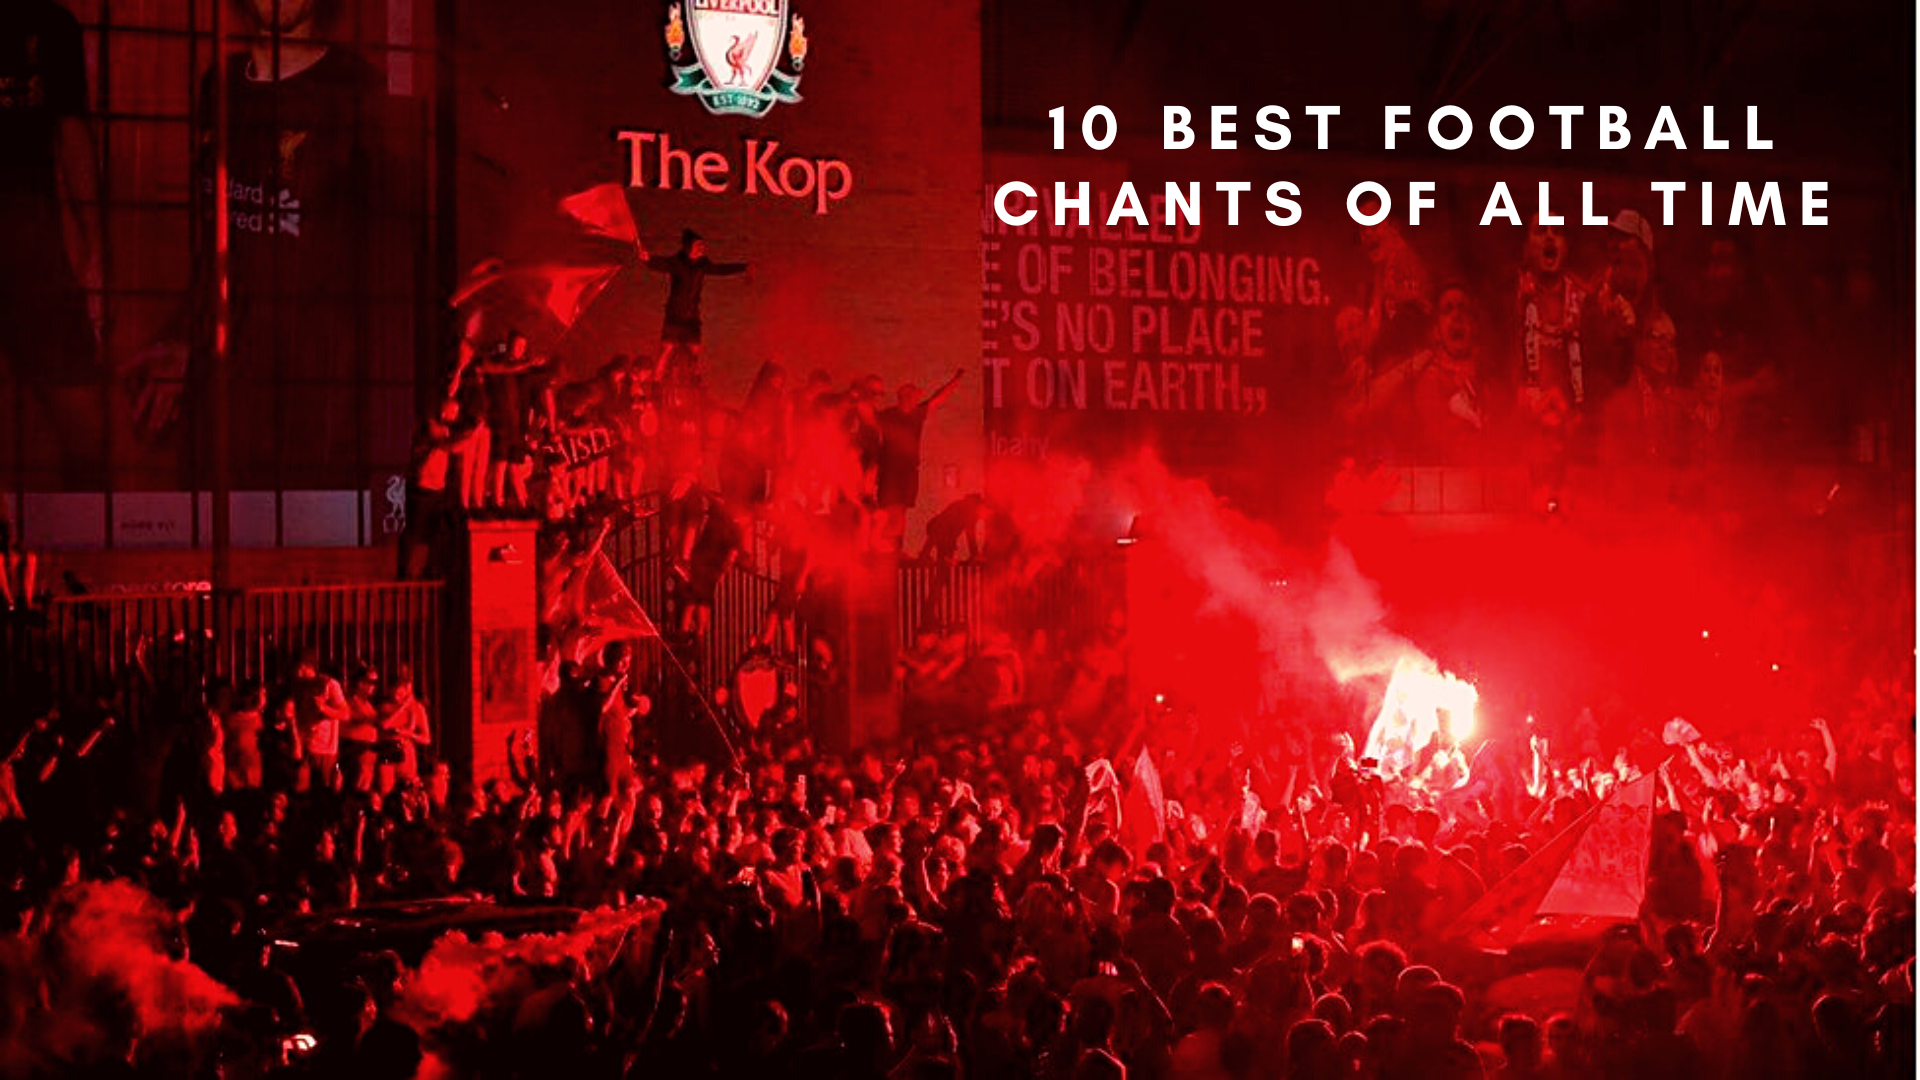 Here is the list of 10 Best football chants of all time. (Credit: Getty Images)